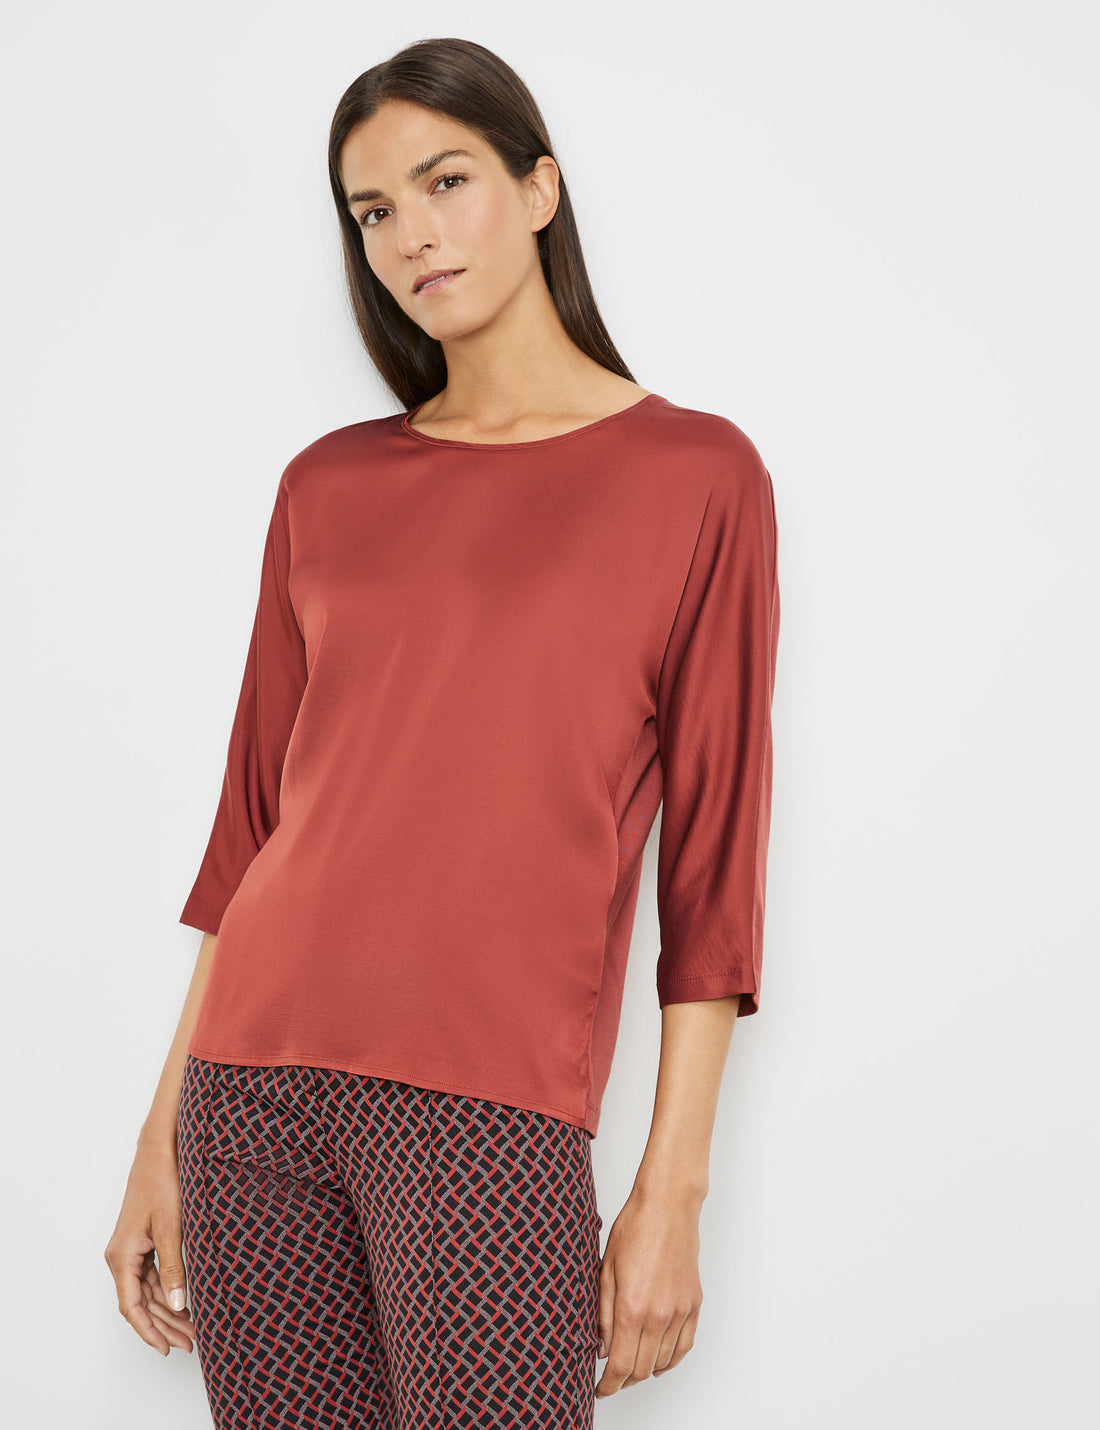 3/4 Sleeve Top With A Fabric Panel And A Subtle Sheen_270229-35033_60703_01